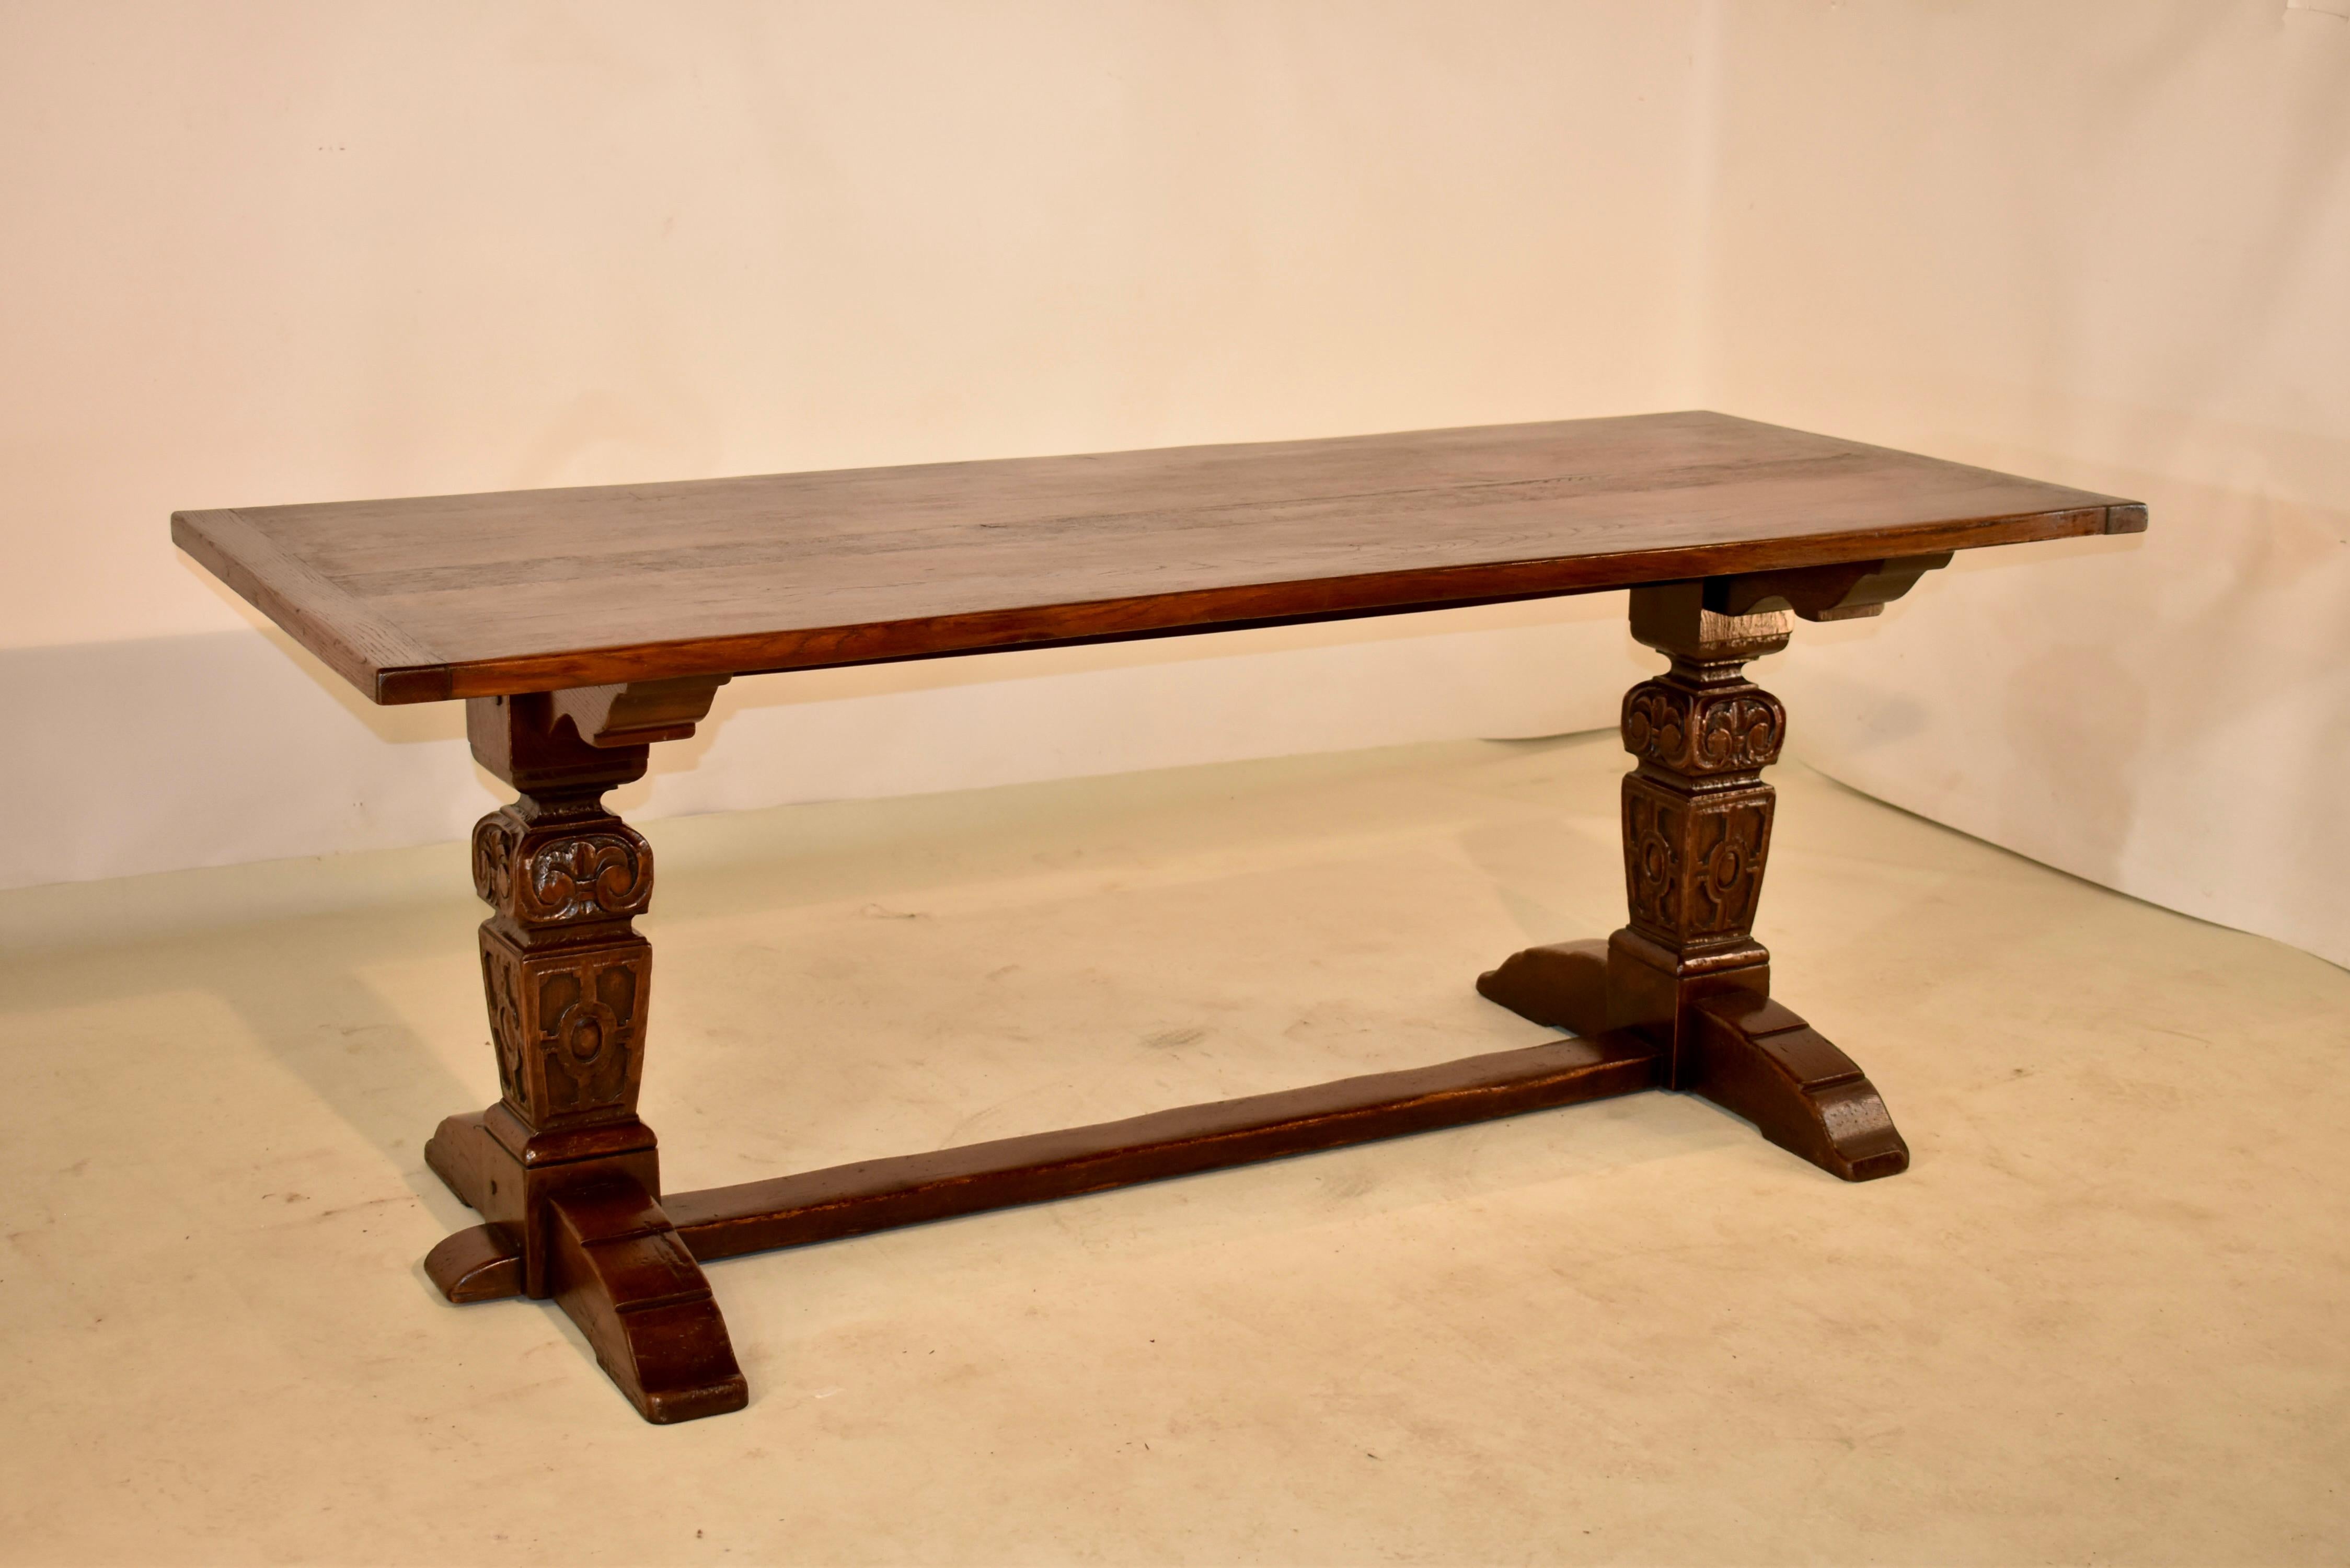 Late 19th century oak trestle table from England. The top is wonderfully grained and has a rich color. This sits atop a trestle base. The legs are hand-turned square and carved decorated and are supported upon a trestle base with a cross stretcher.